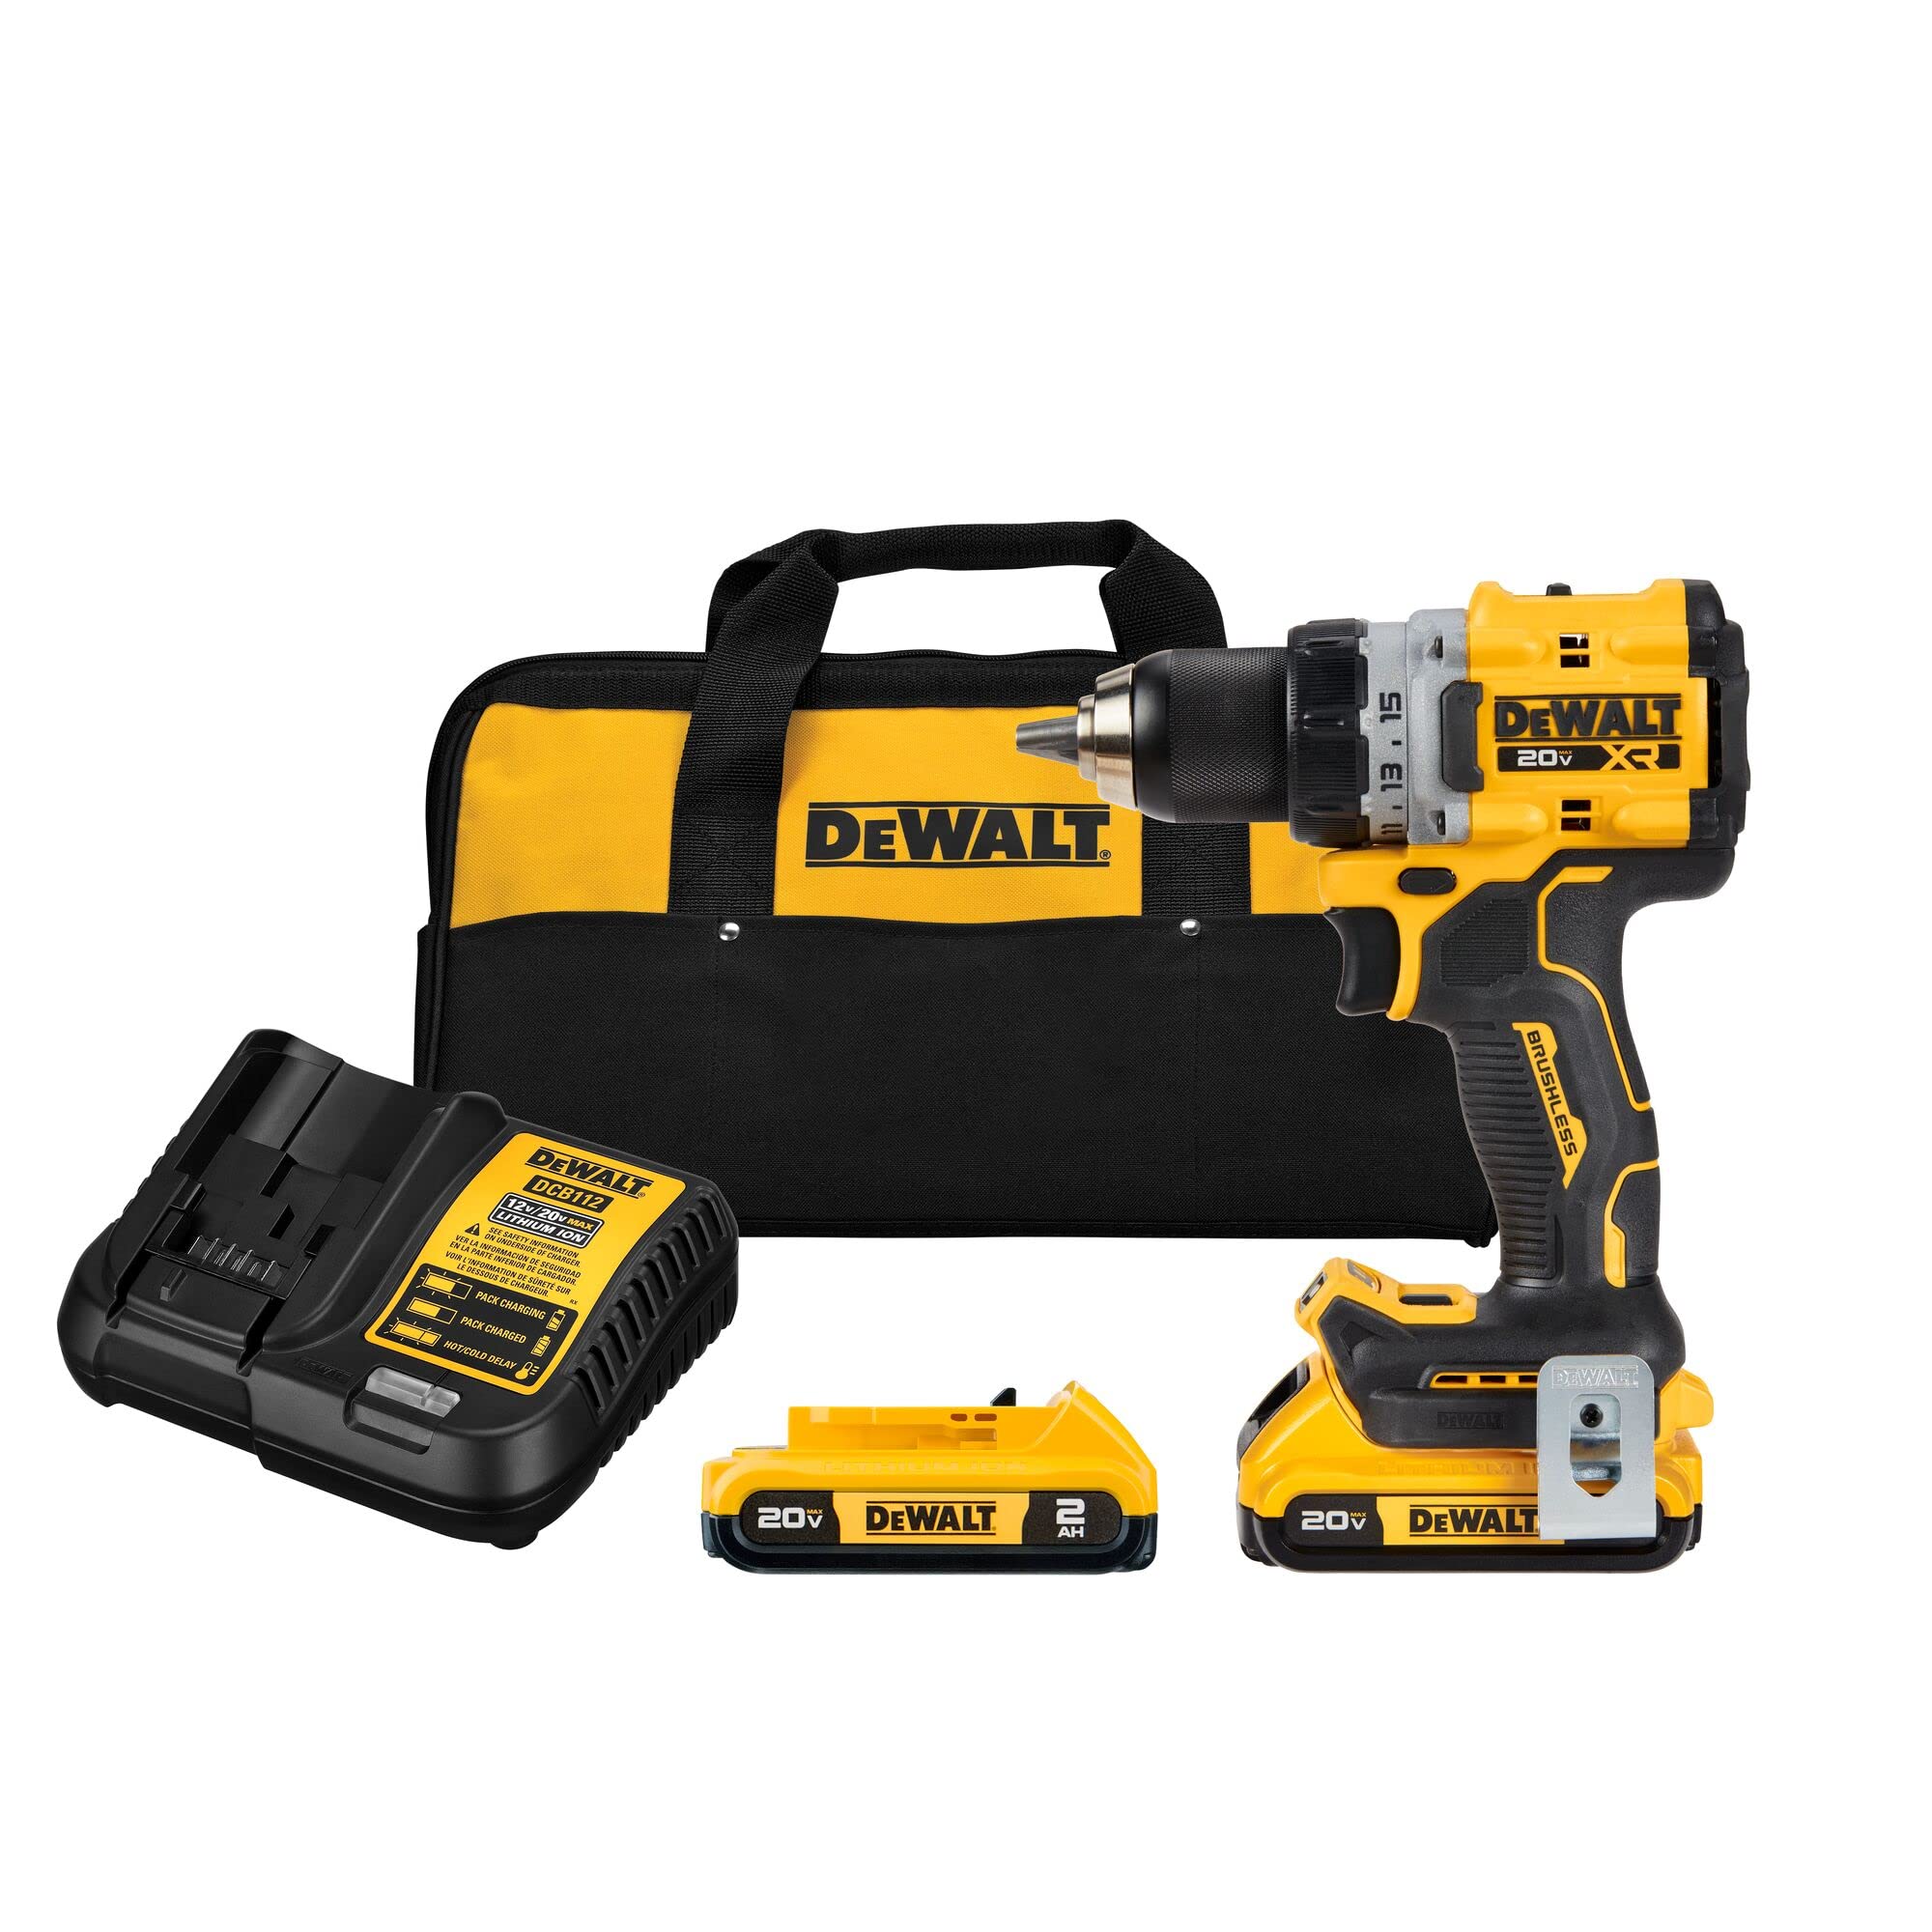 DEWALT 20V MAX XR Cordless Drill/Driver Kit, Brushless, Compact, with 2 Batteries and Charger